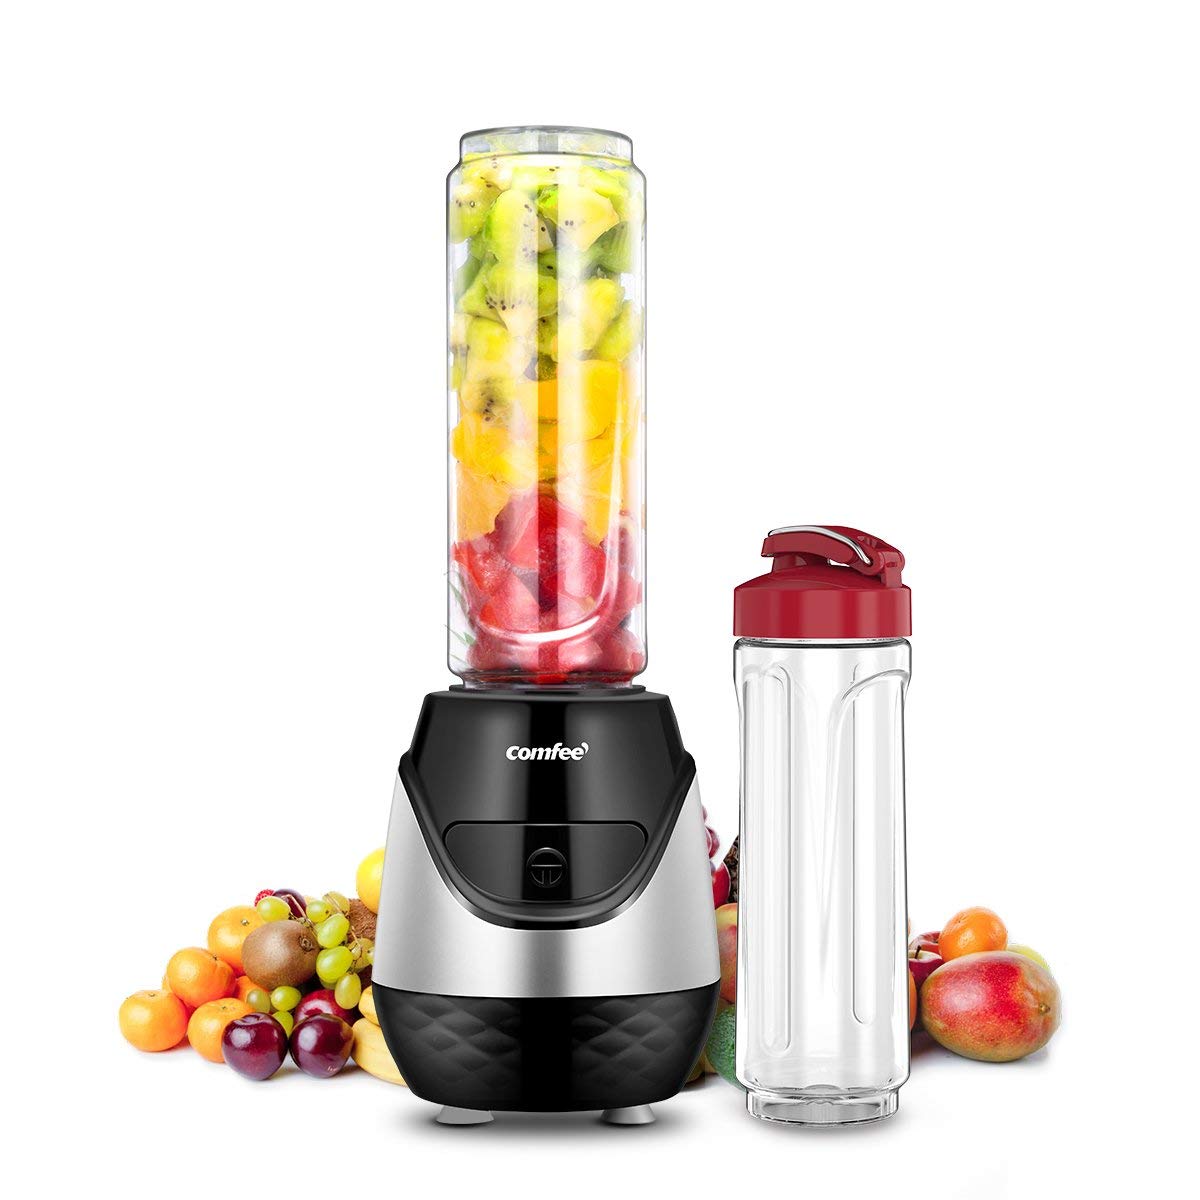 Today only: Comfee personal blender for $19 shipped